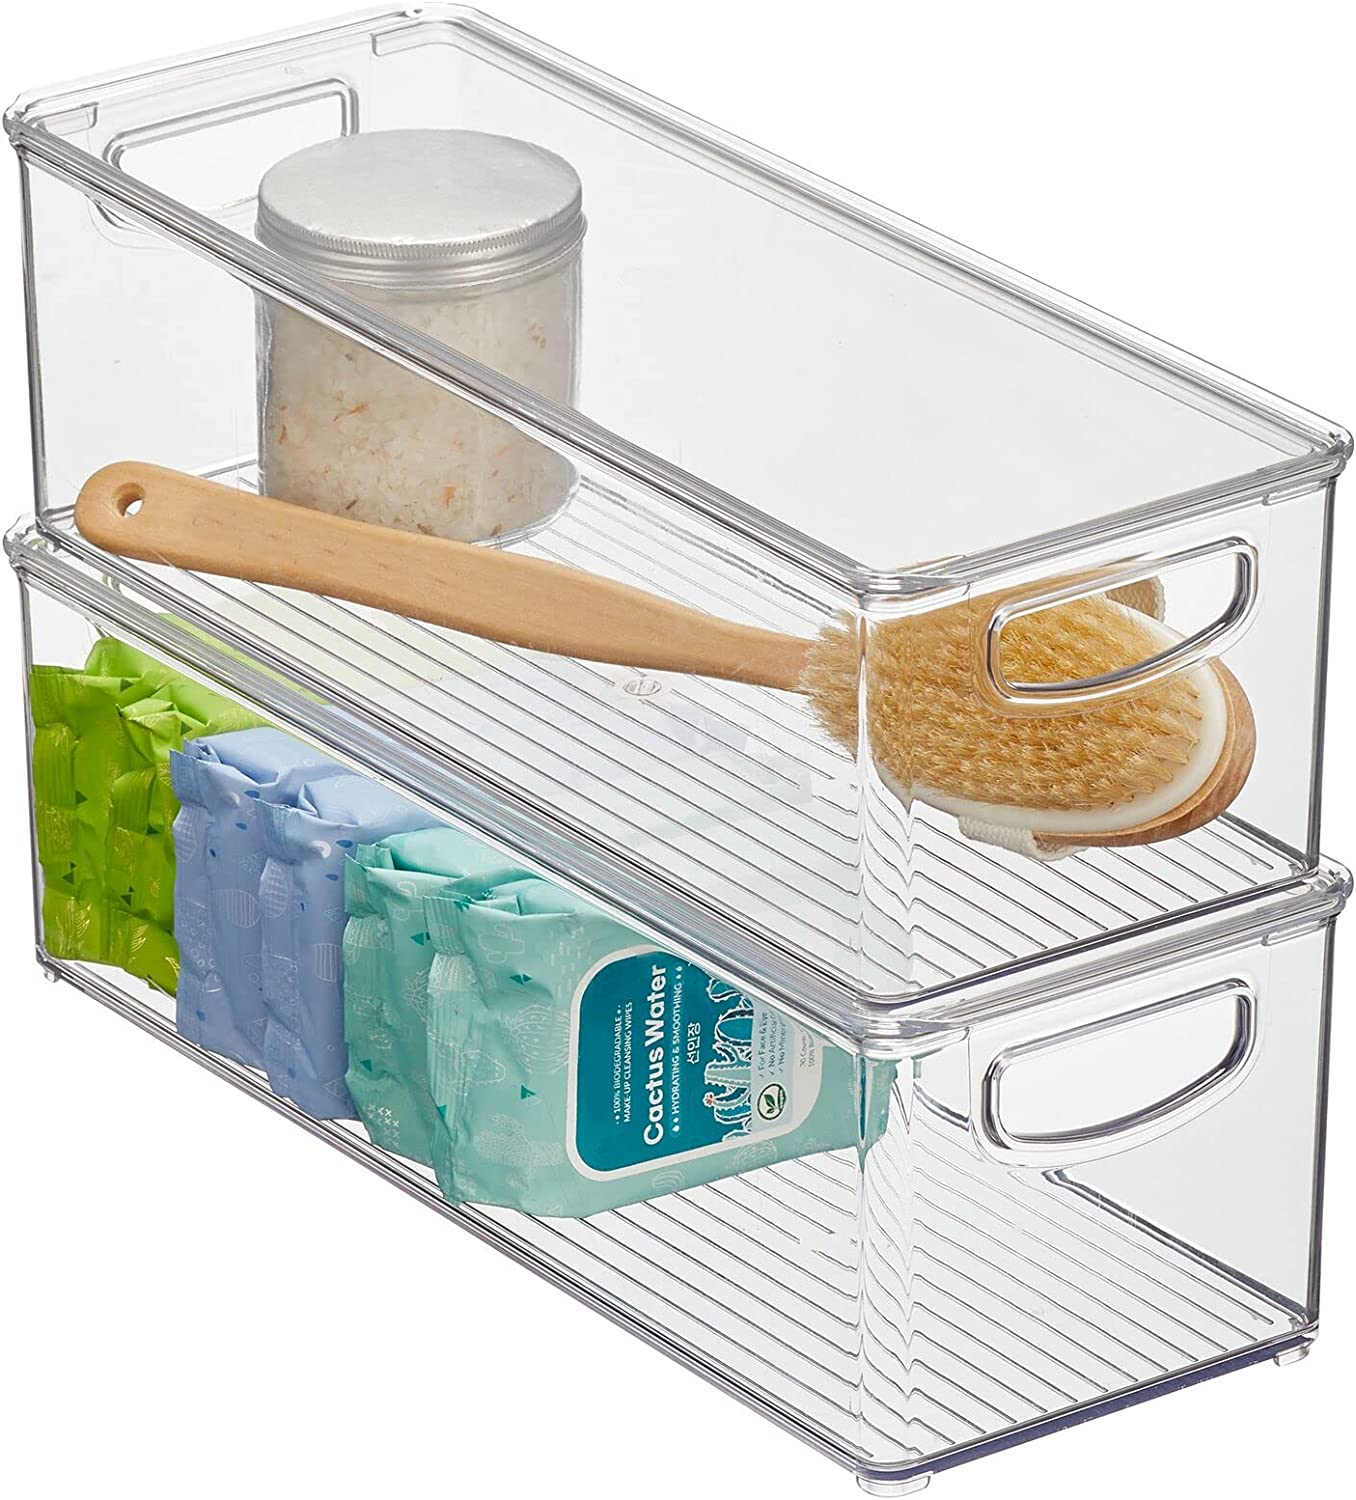 mDesign Deep Plastic Bathroom Storage Bin Box, Lid/Built-in Handles, Organization for Makeup, Hair Styling Tools, Toiletry Accessories in Cabinet, Shelves, Ligne Collection, 2 Pack, Clear/Clear